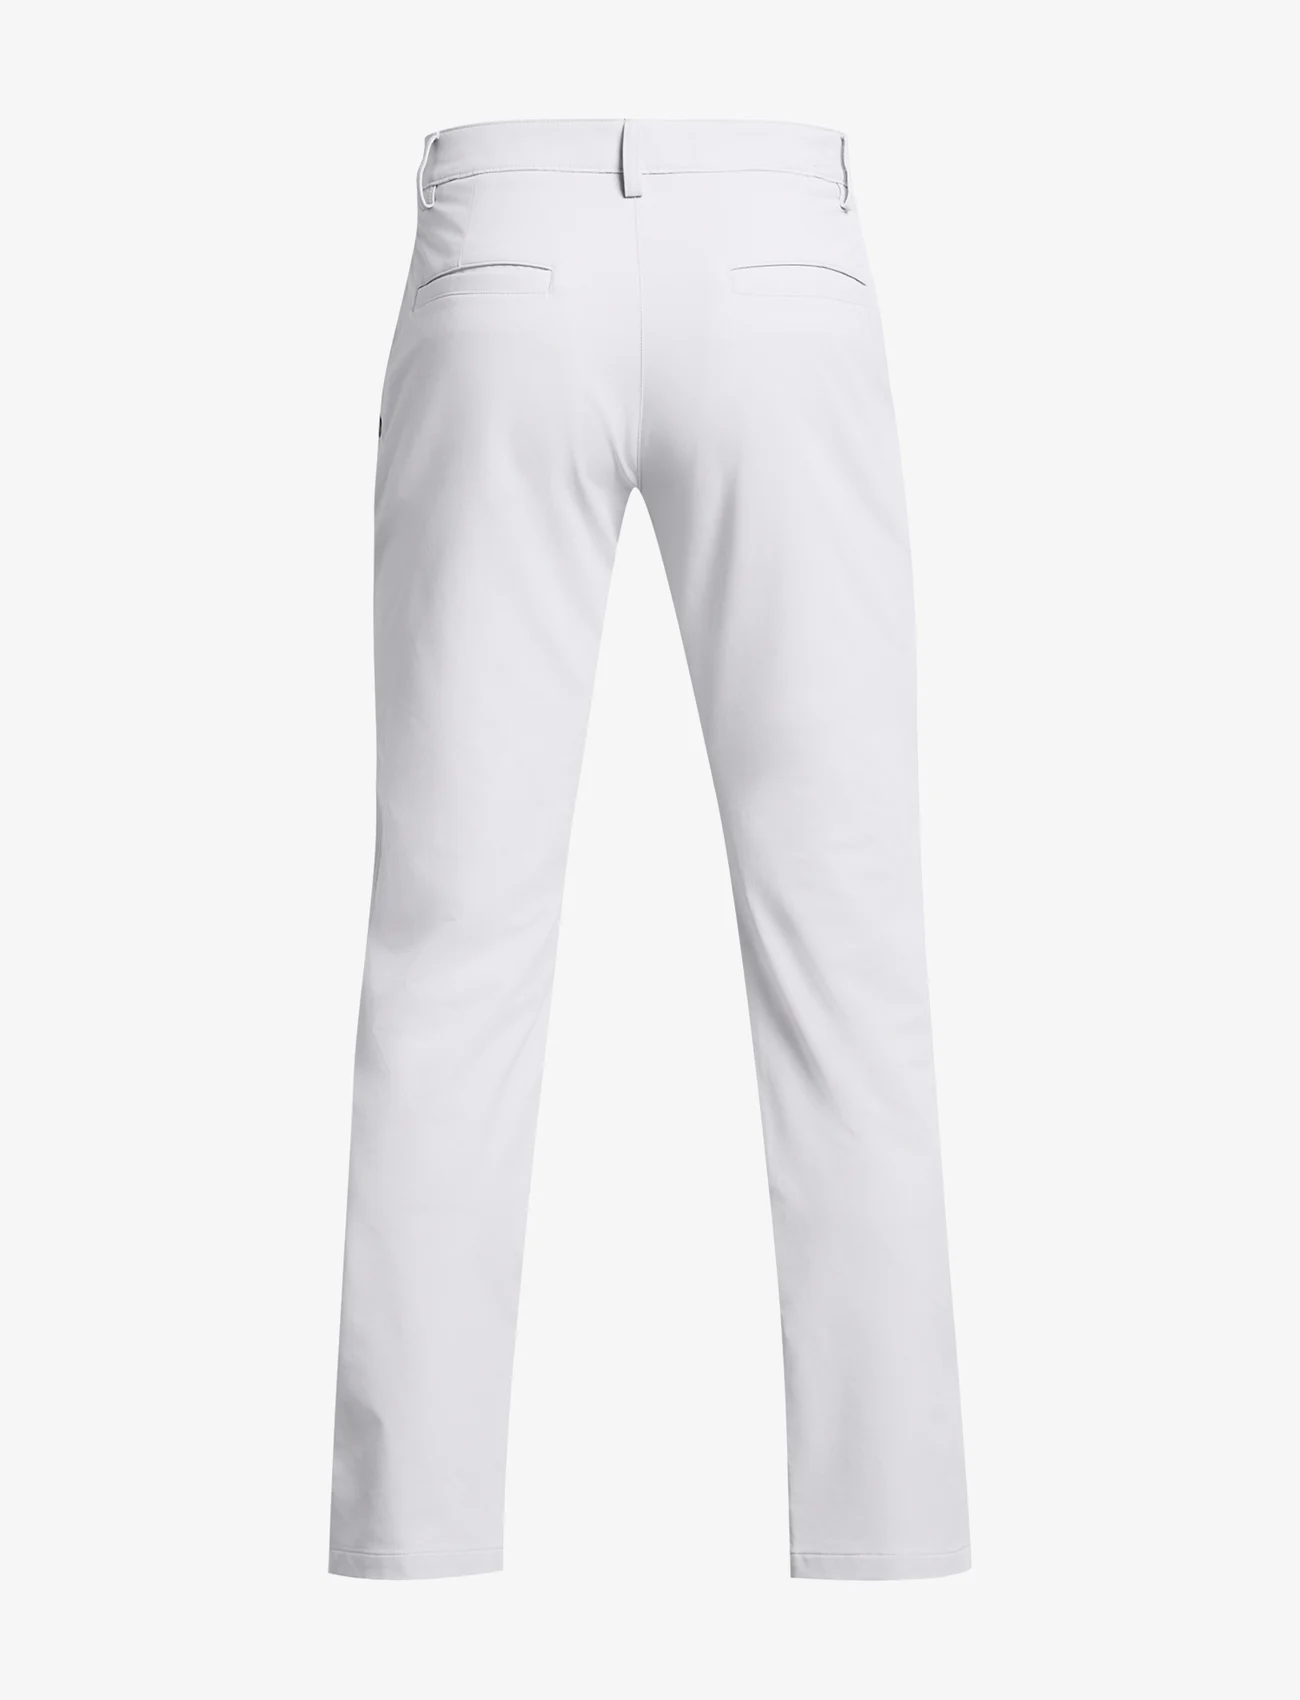 Under Armour - UA Tech Tapered Pant - golfbukser - halo gray - 1